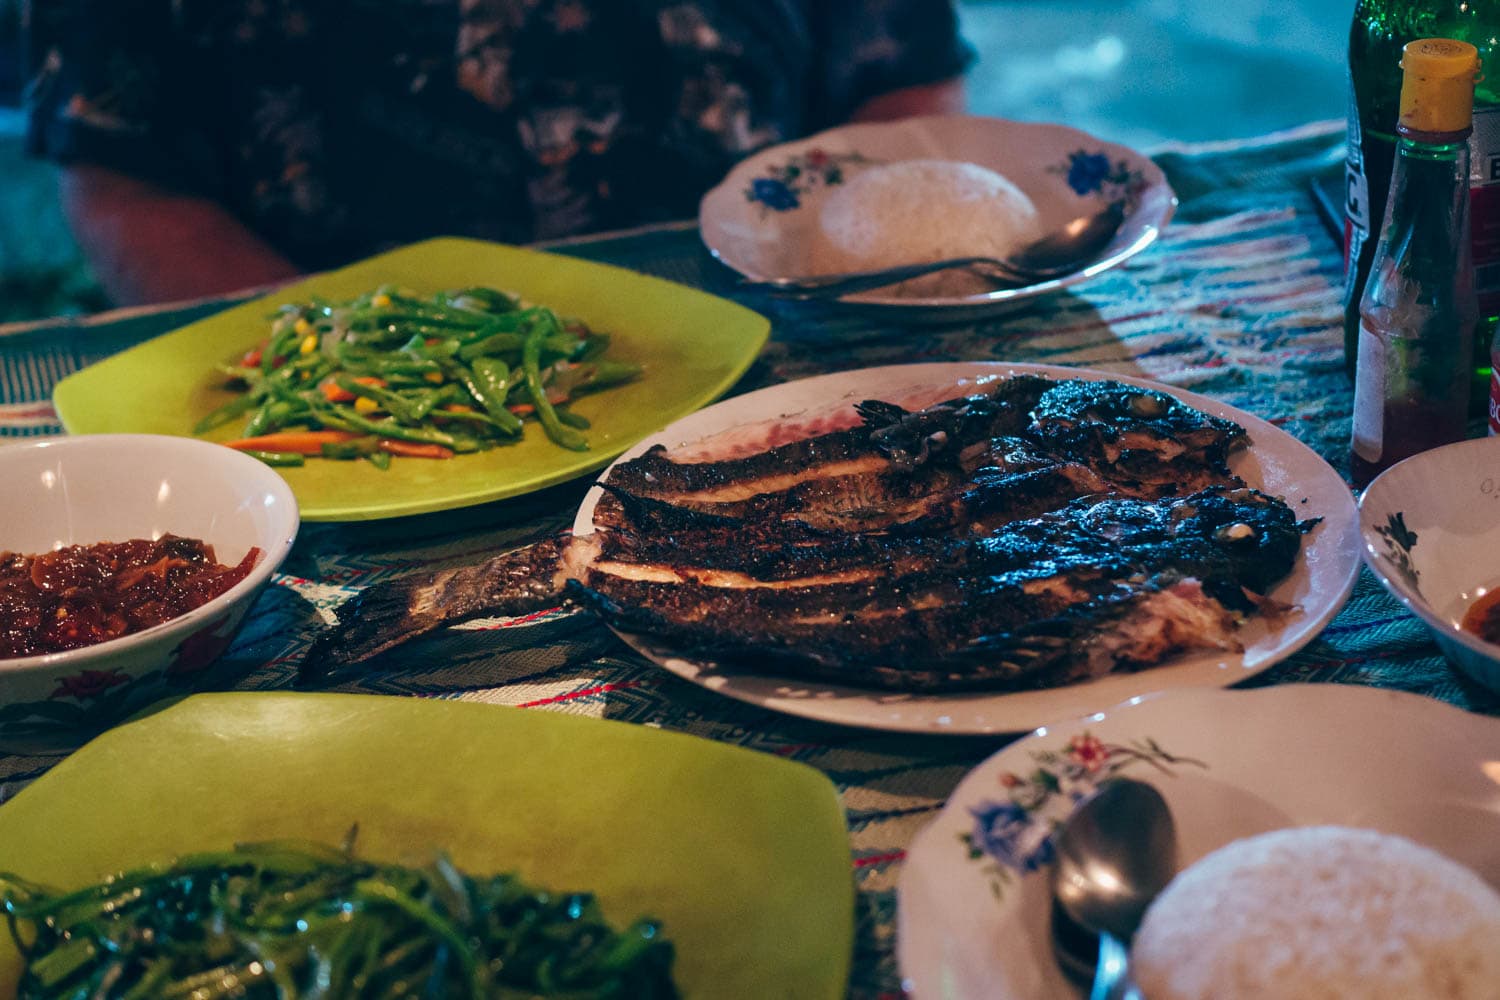 Grilled fish with vegetables and rice served on white and green plates, one of the best things to eat in Lombok.